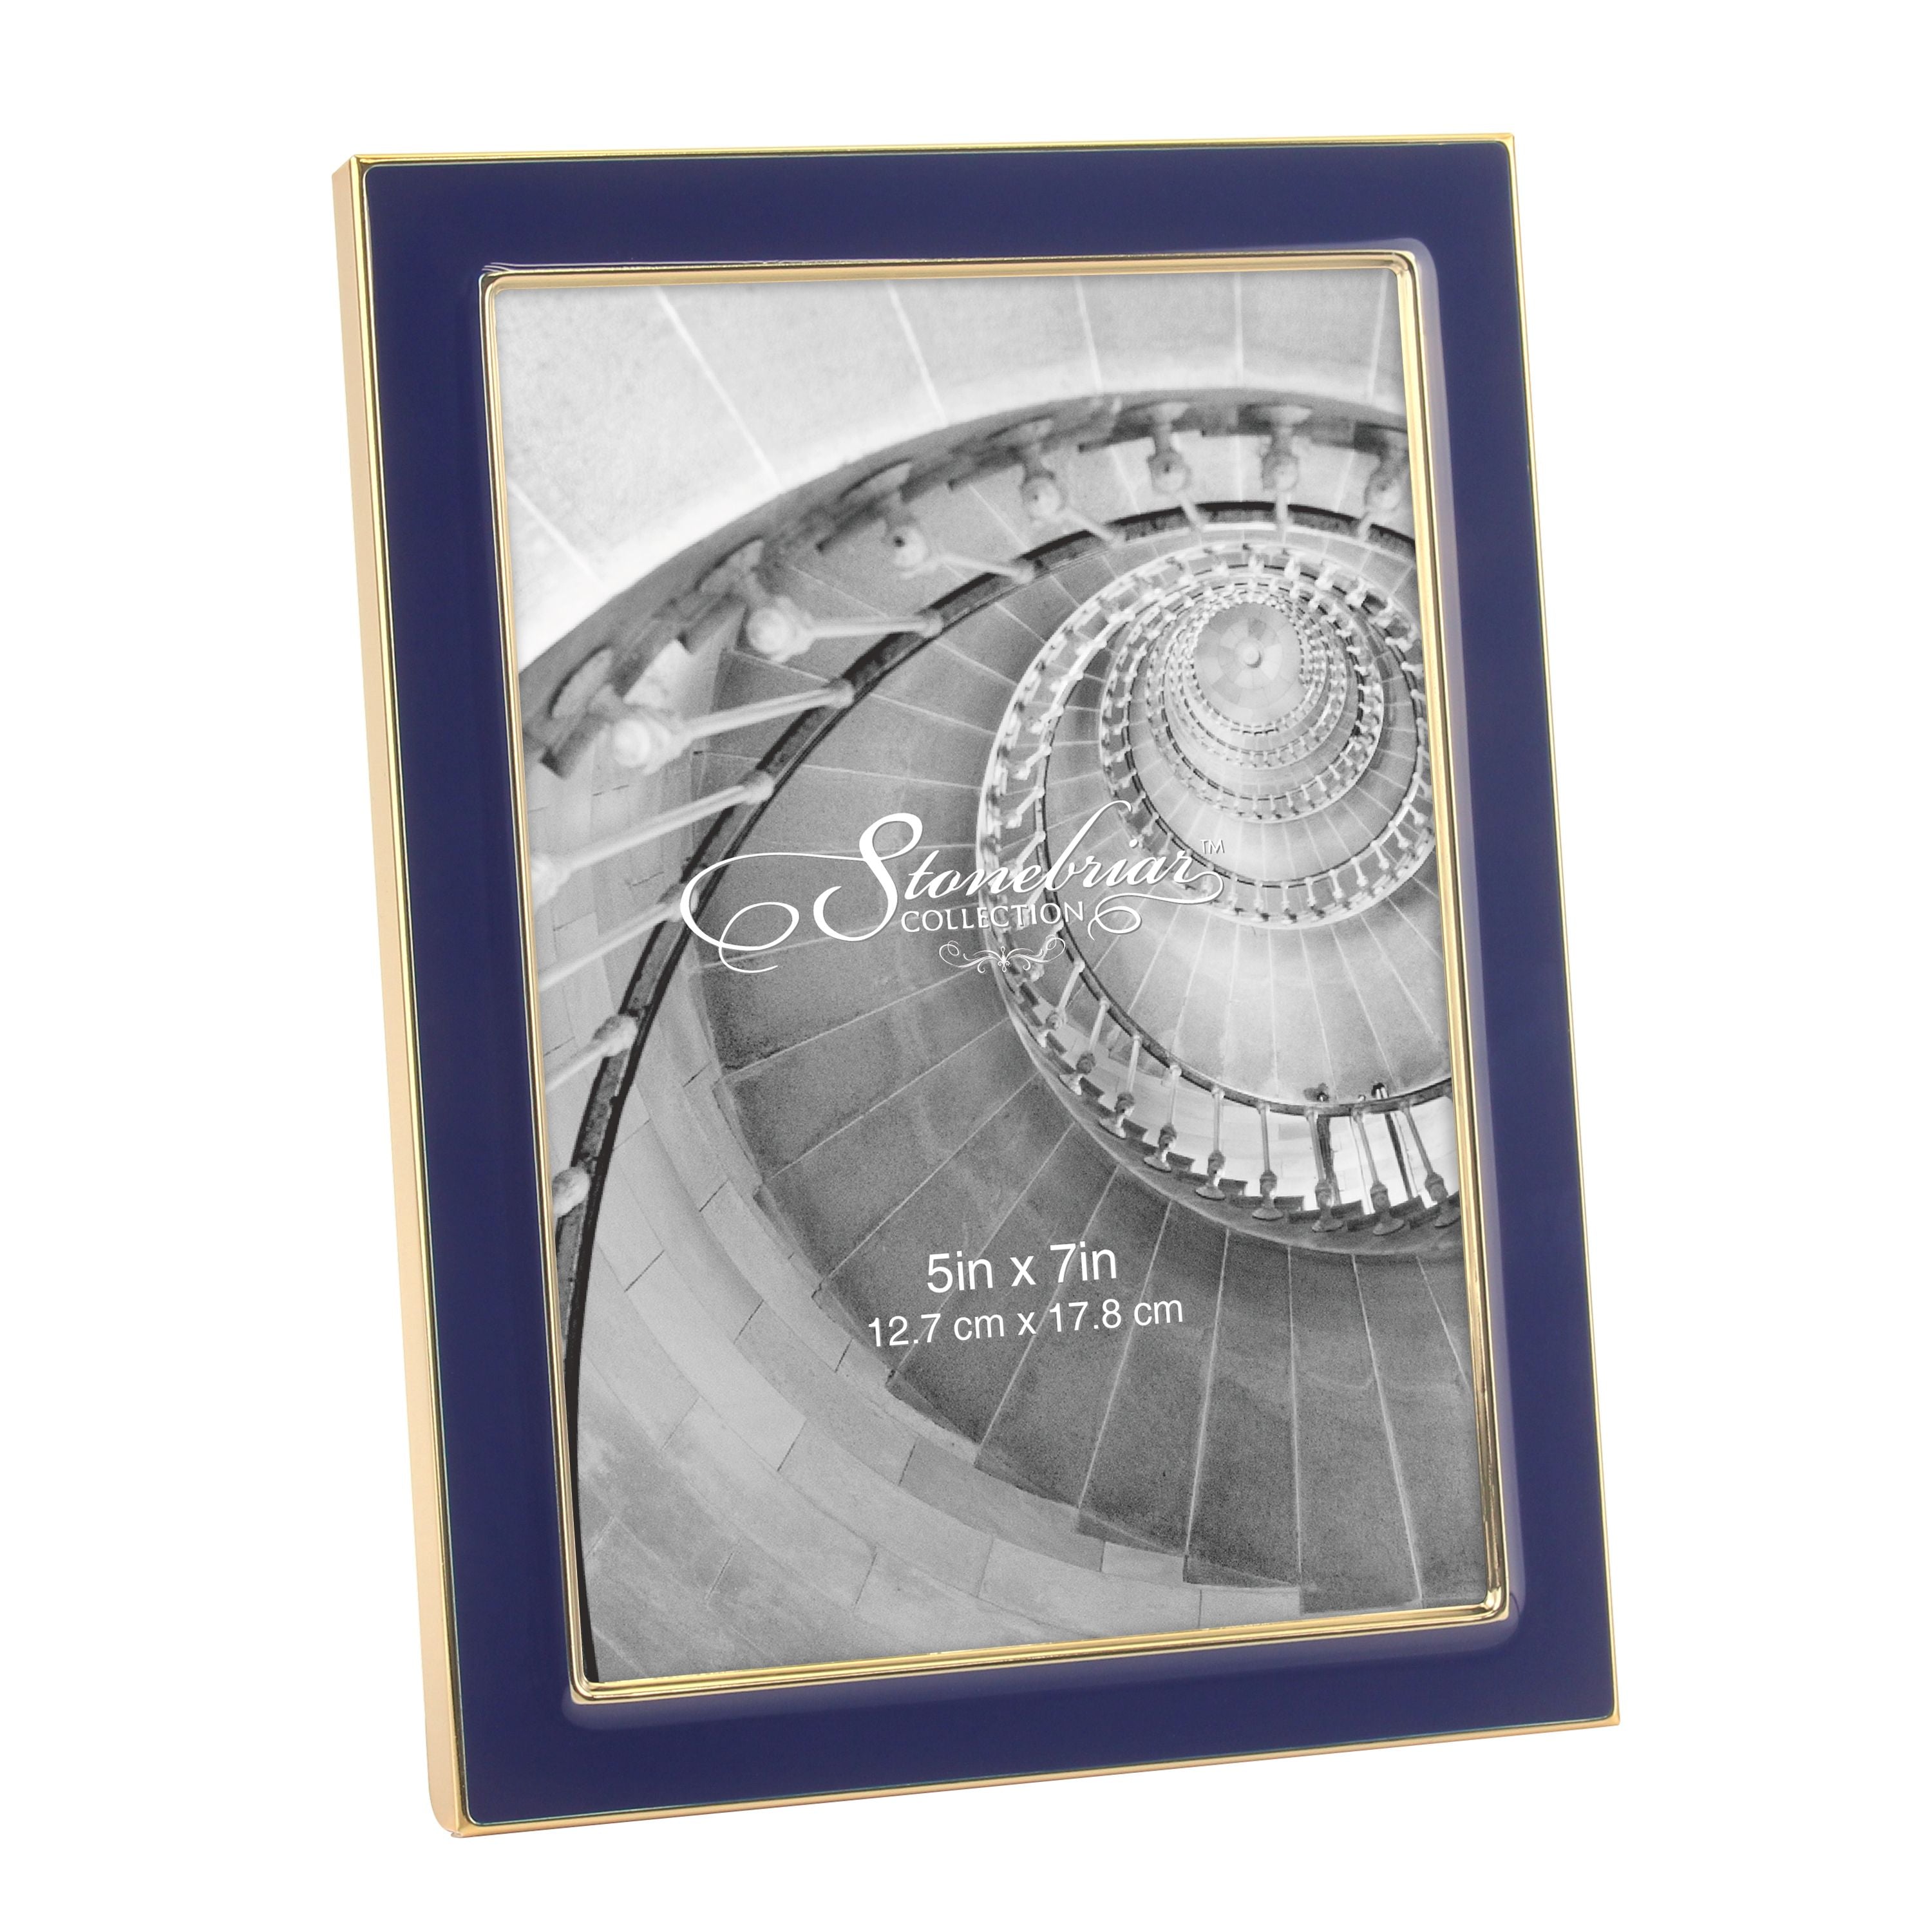 Stonebriar Decorative Epoxy Photo Frame for Table Top or Wall Hanging Display (WS)